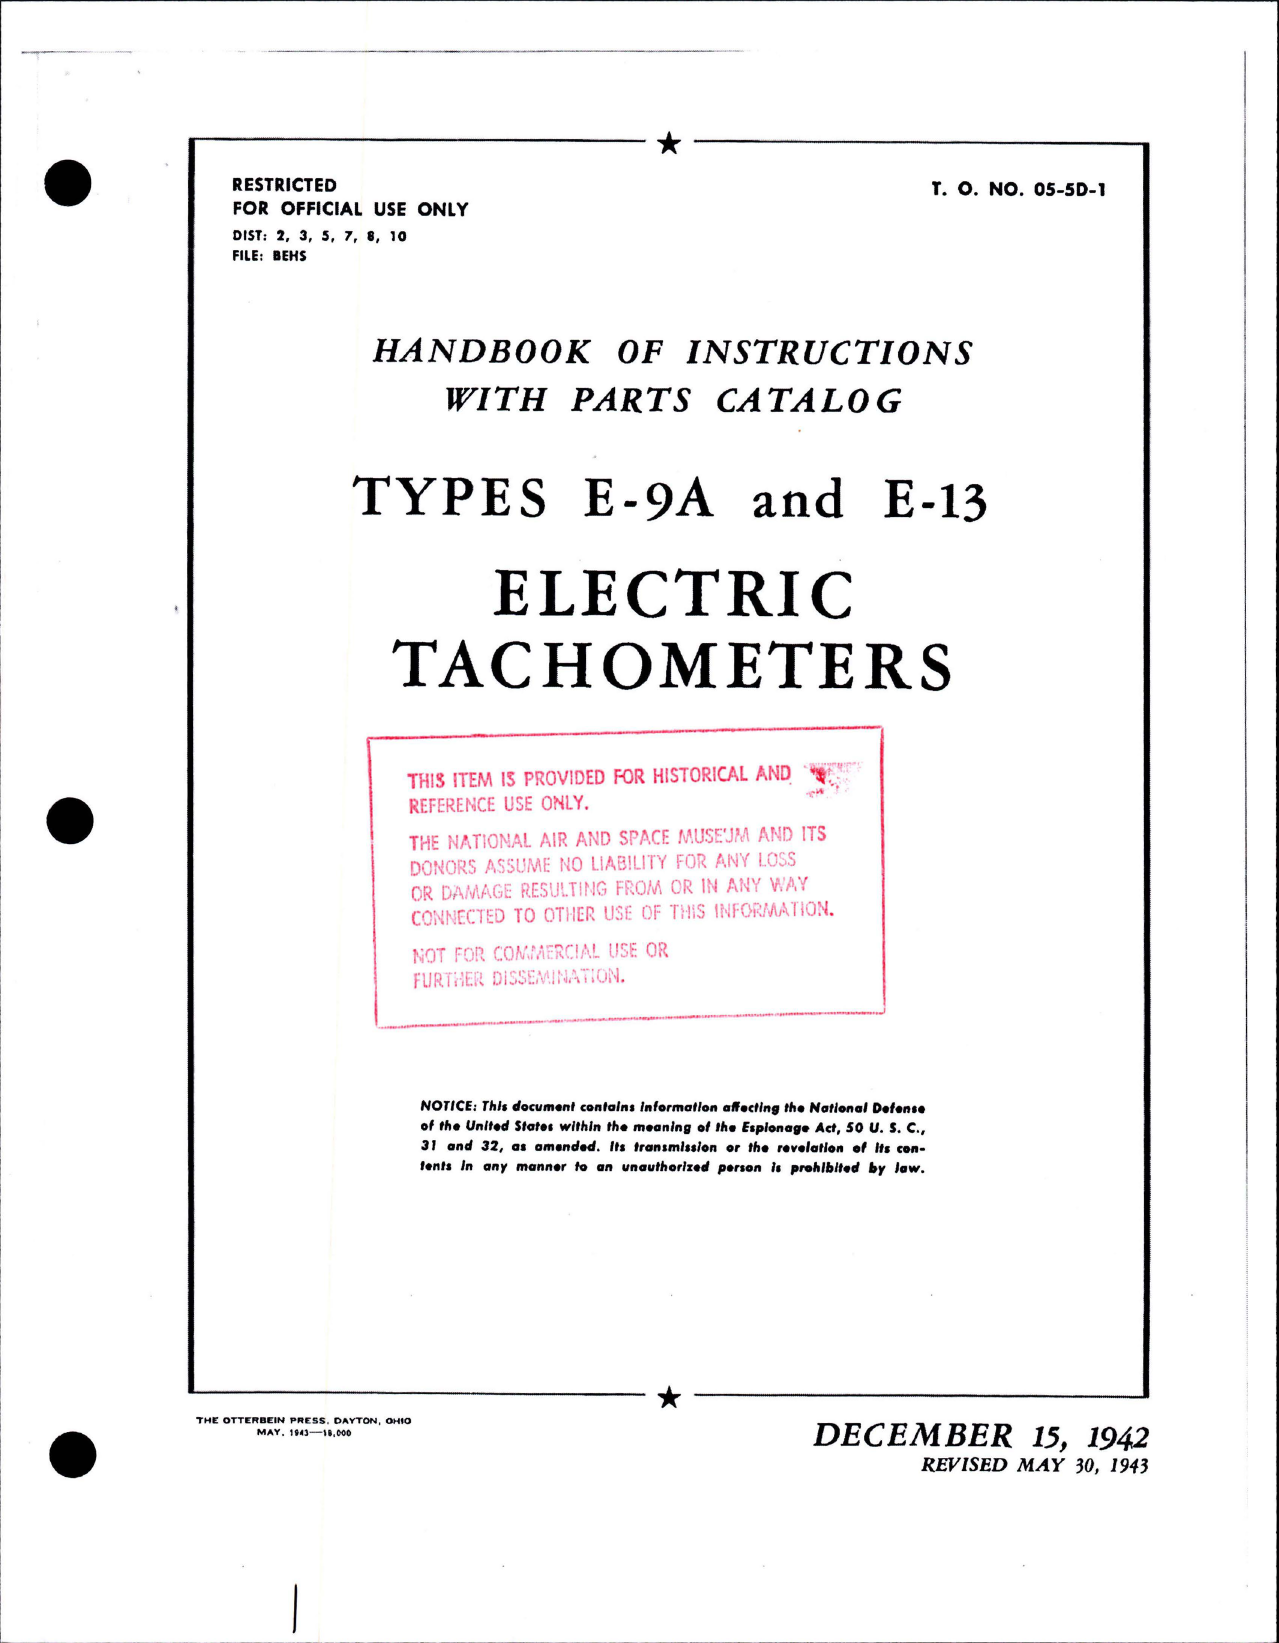 Sample page 1 from AirCorps Library document: Instructions with Parts Catalog for Electric Tachometers - Types E-9A and E-13 